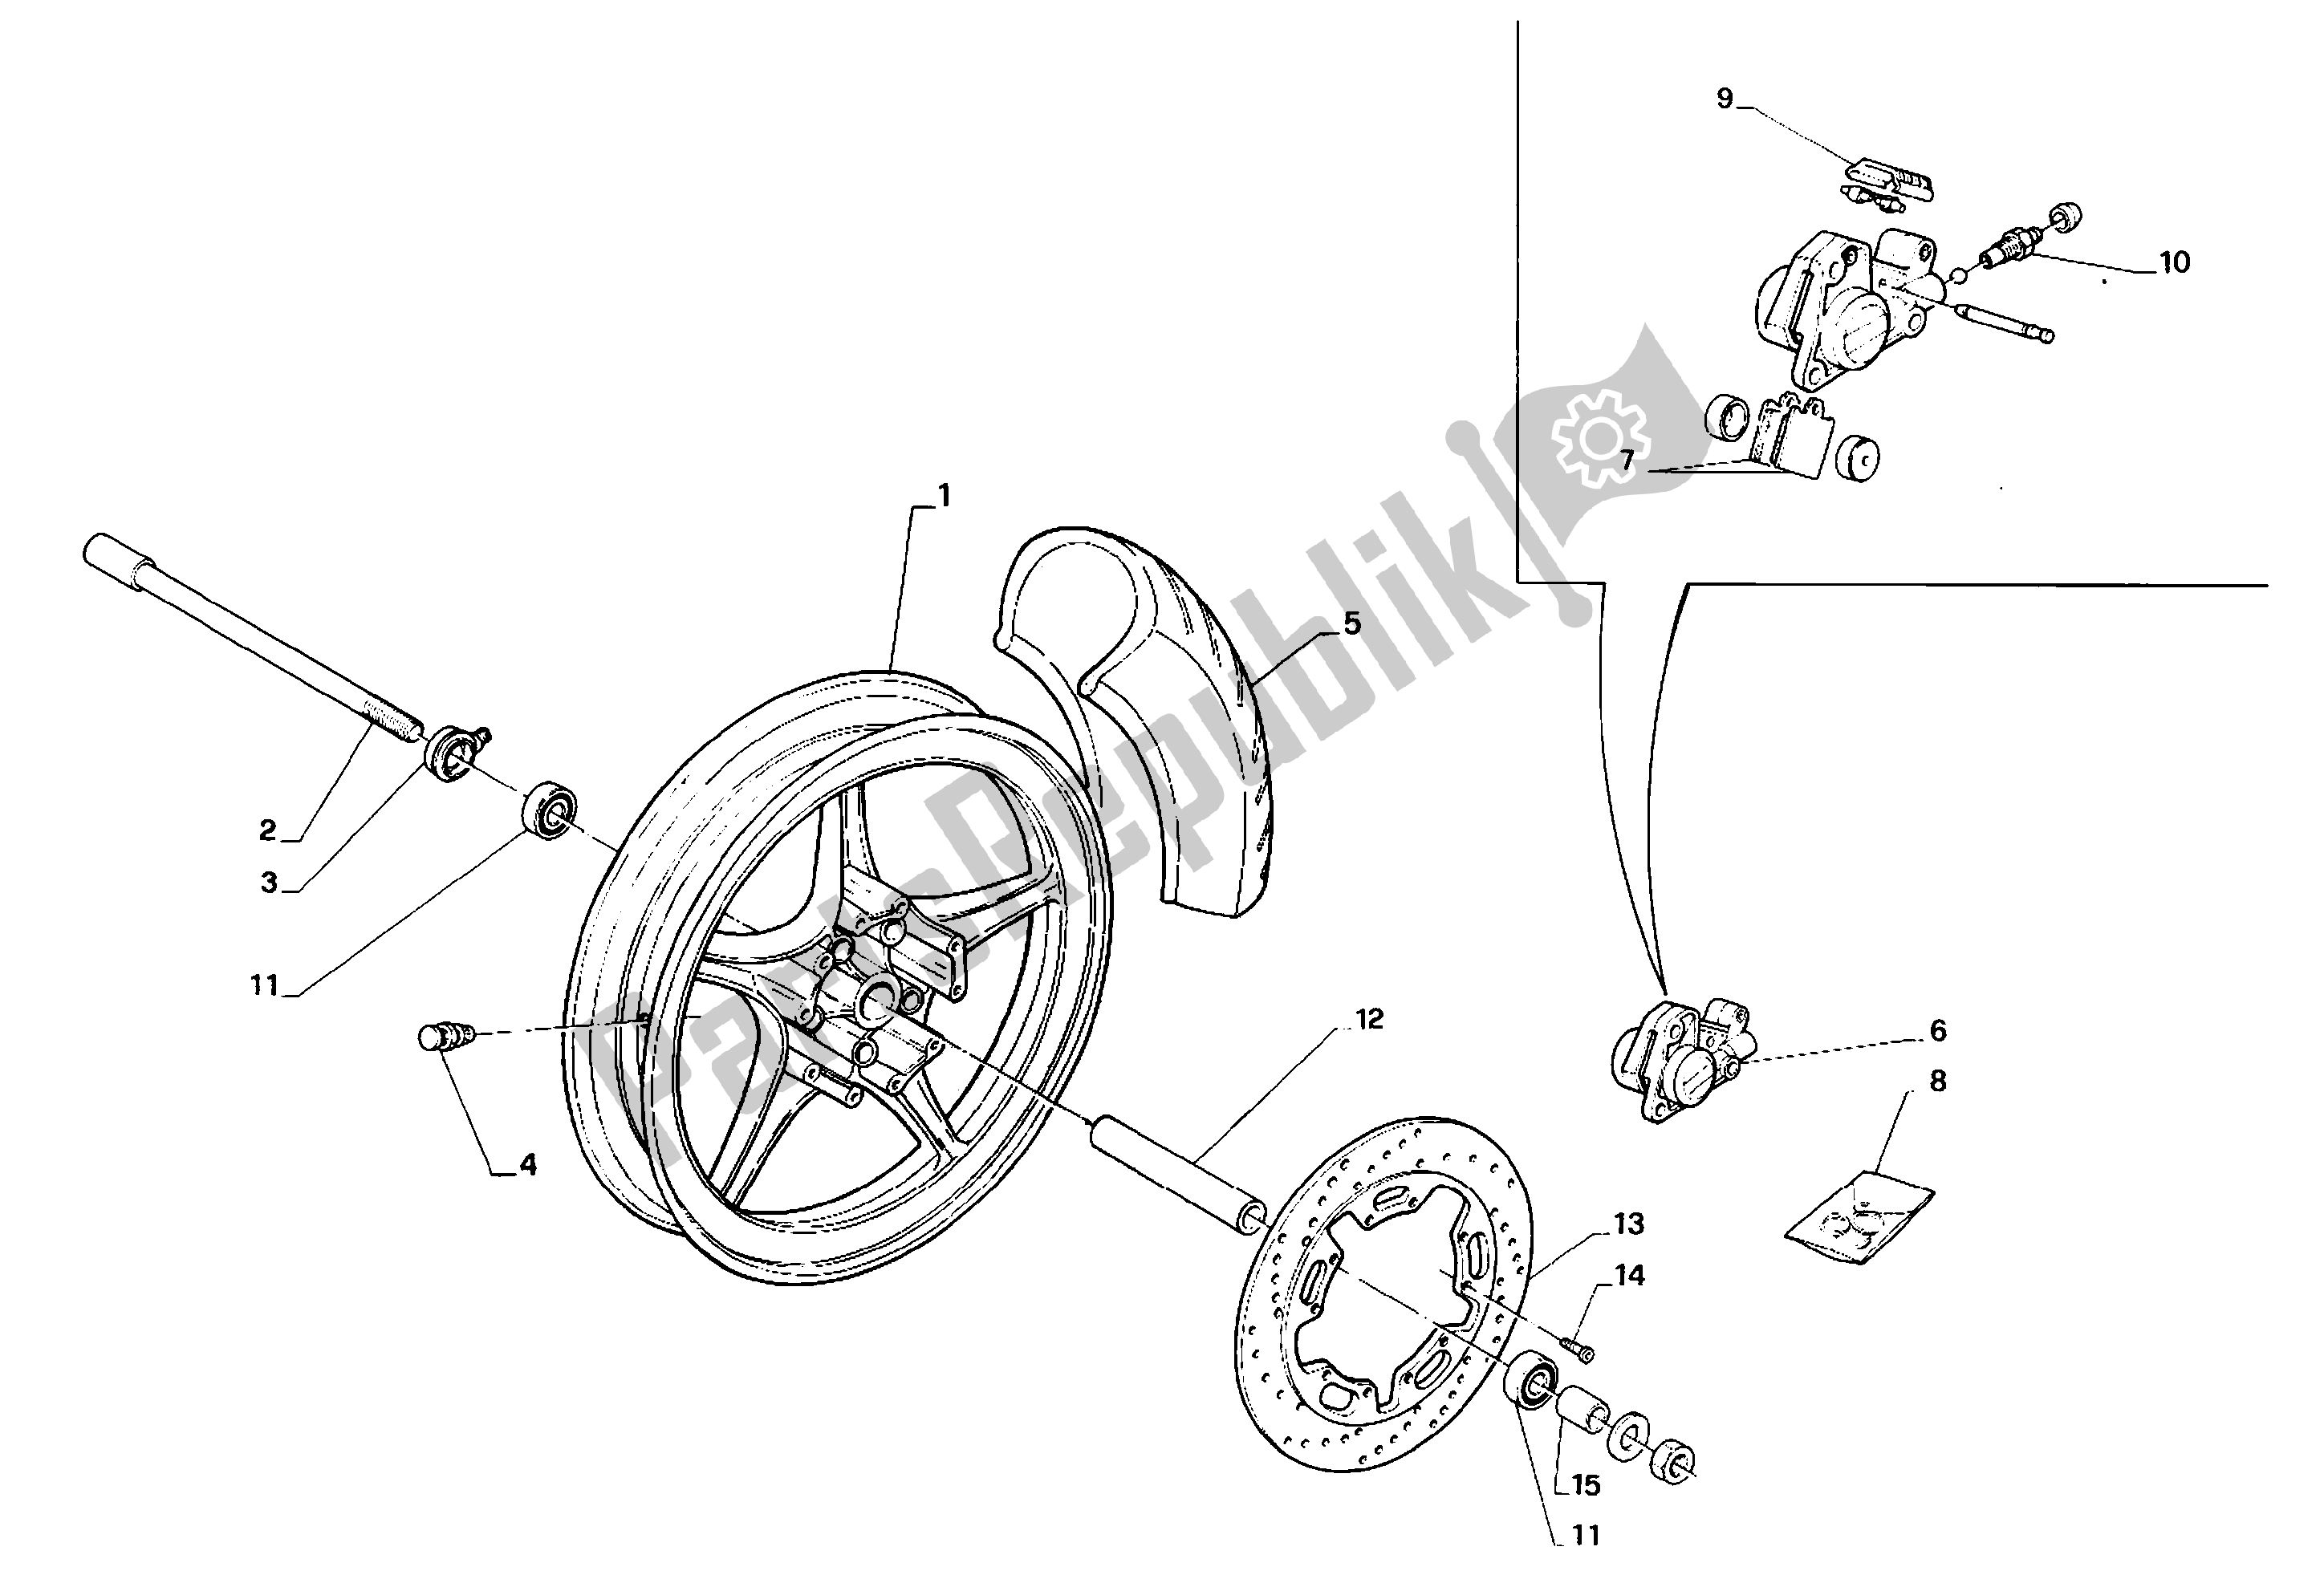 All parts for the Fron Wheel of the Aprilia AF1 50 1991 - 1992